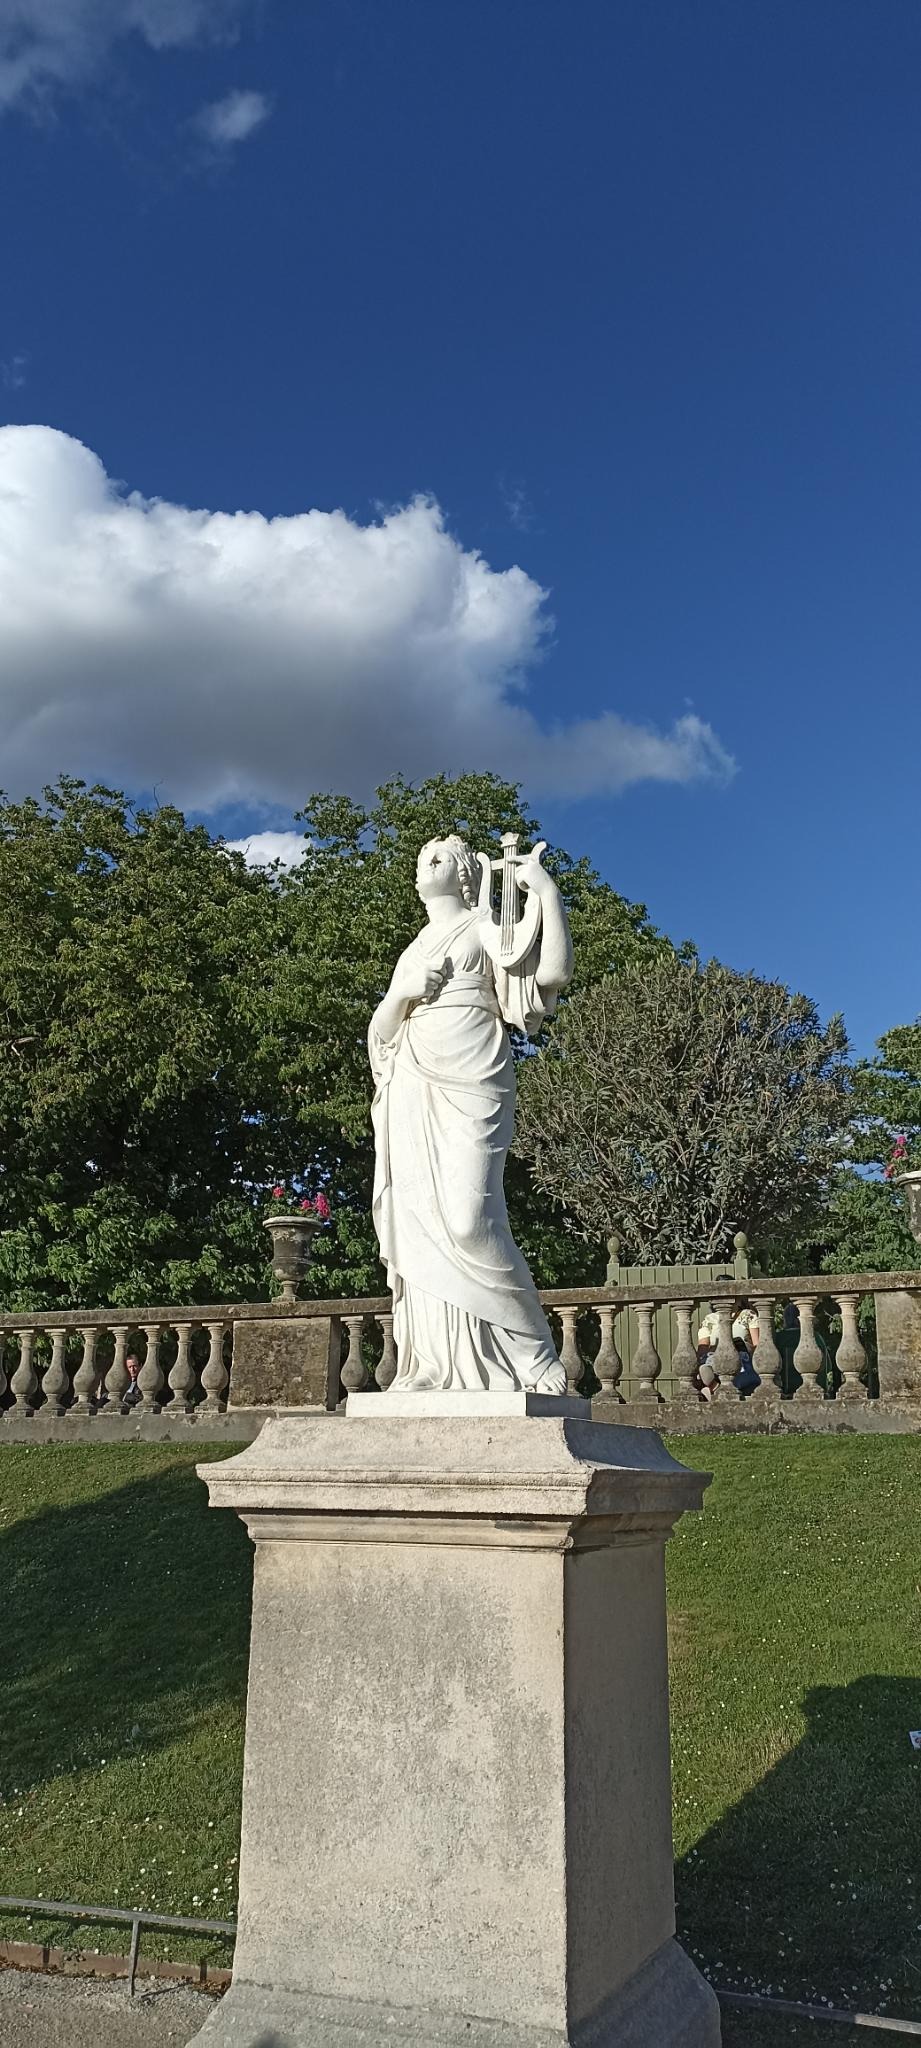 A statue in the Luxembourg Gardens